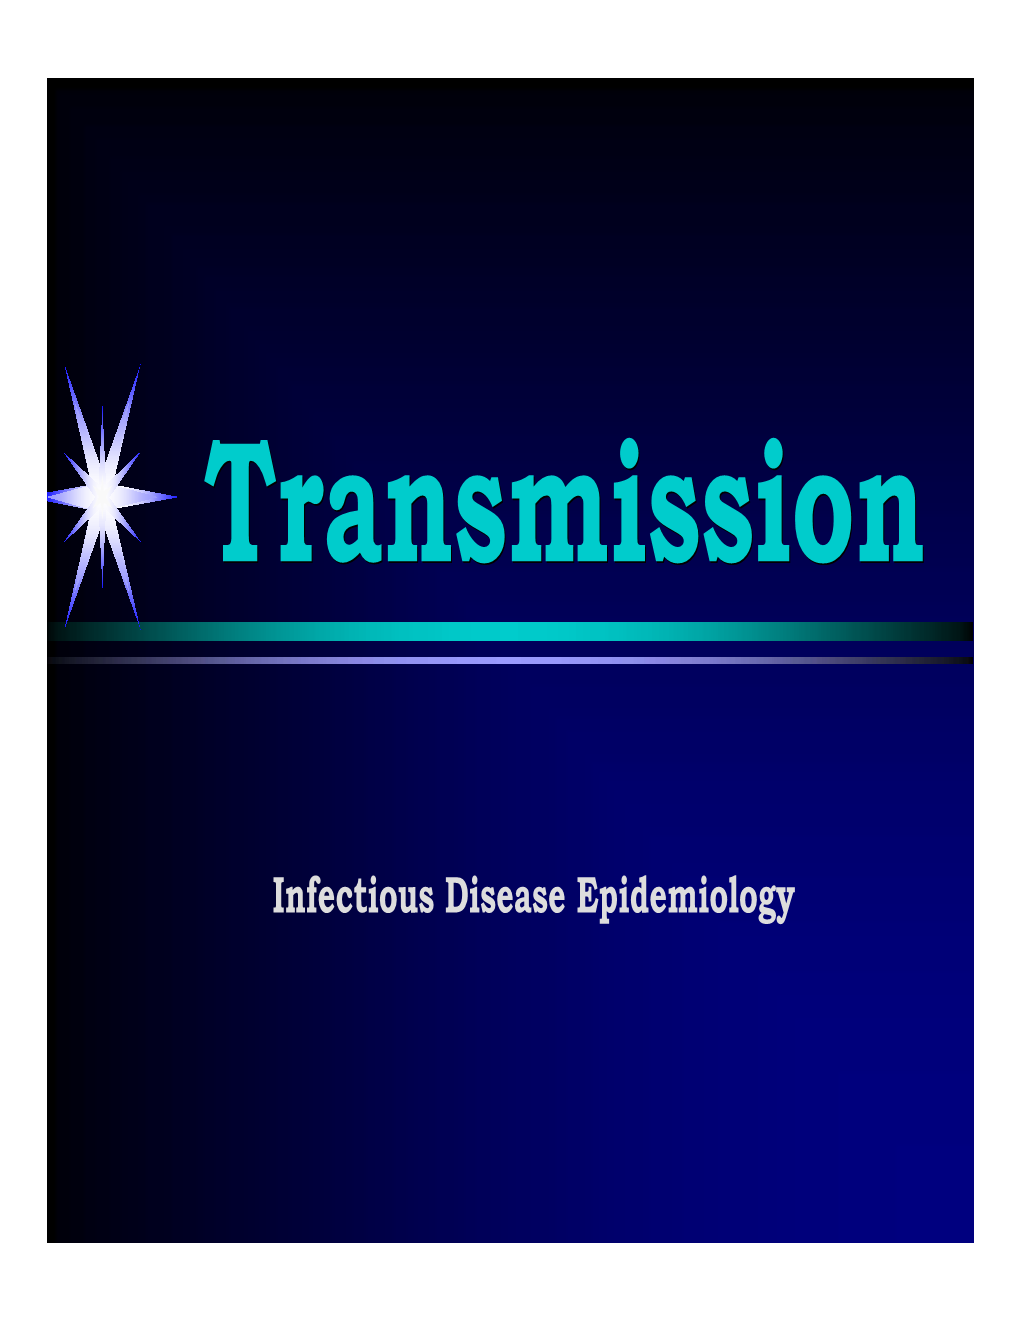 Infectious Disease Epidemiology Mode of Transmission Classification by Portal of Entry